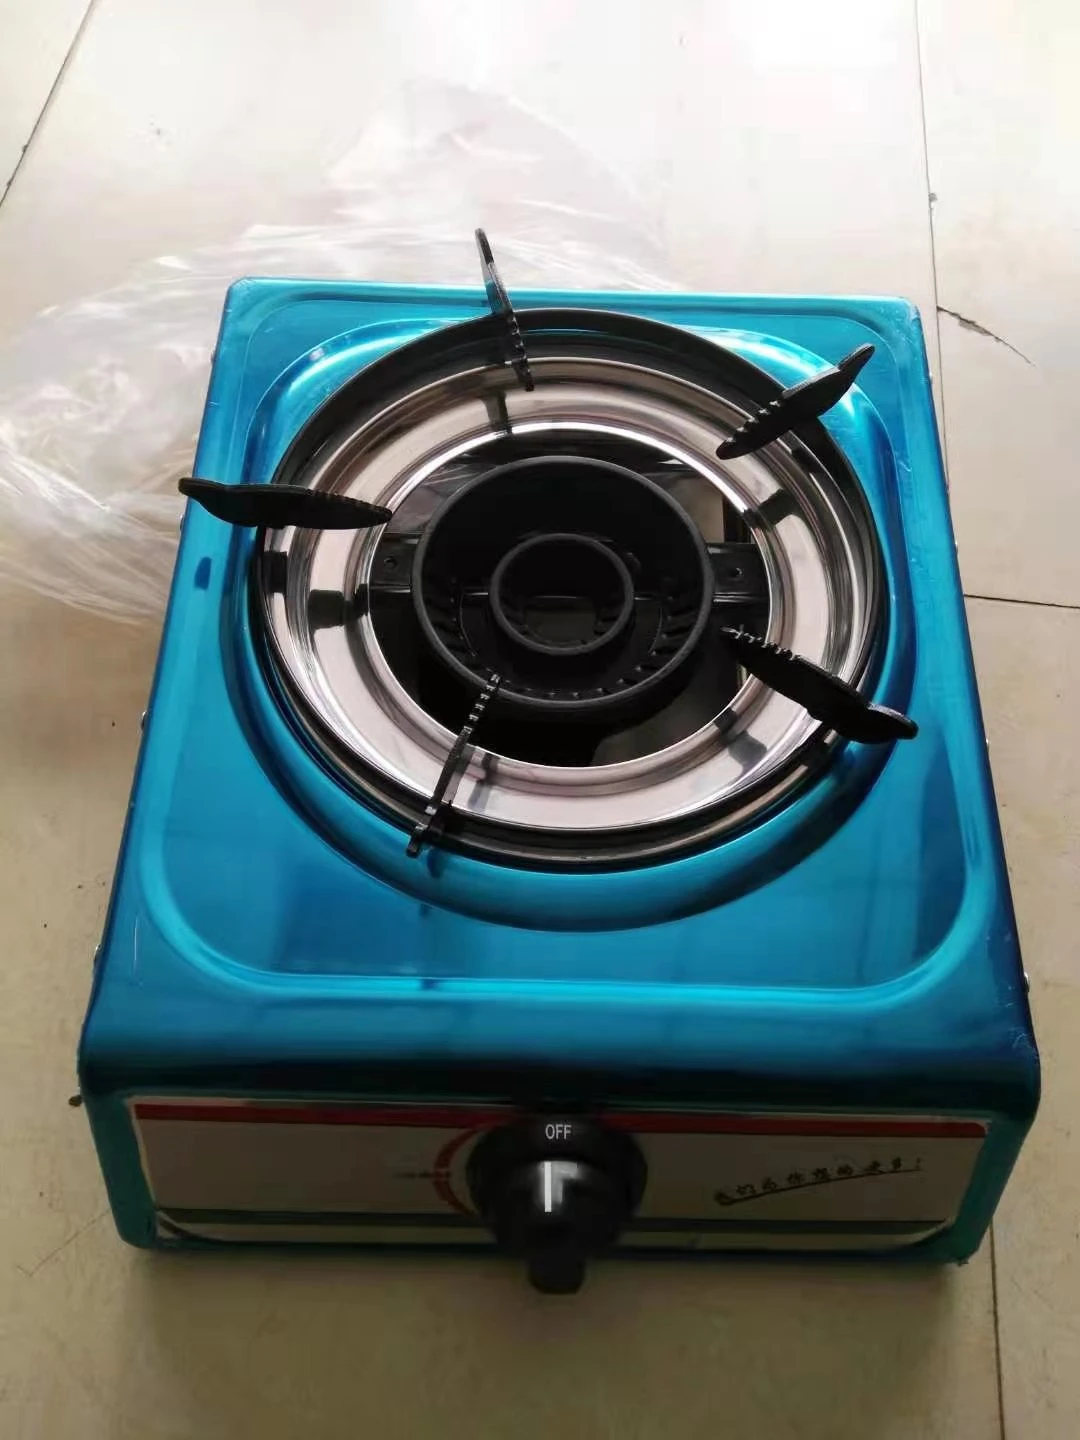 Stainless Steel top 1 burner Gas cooker China gas stove cooktop